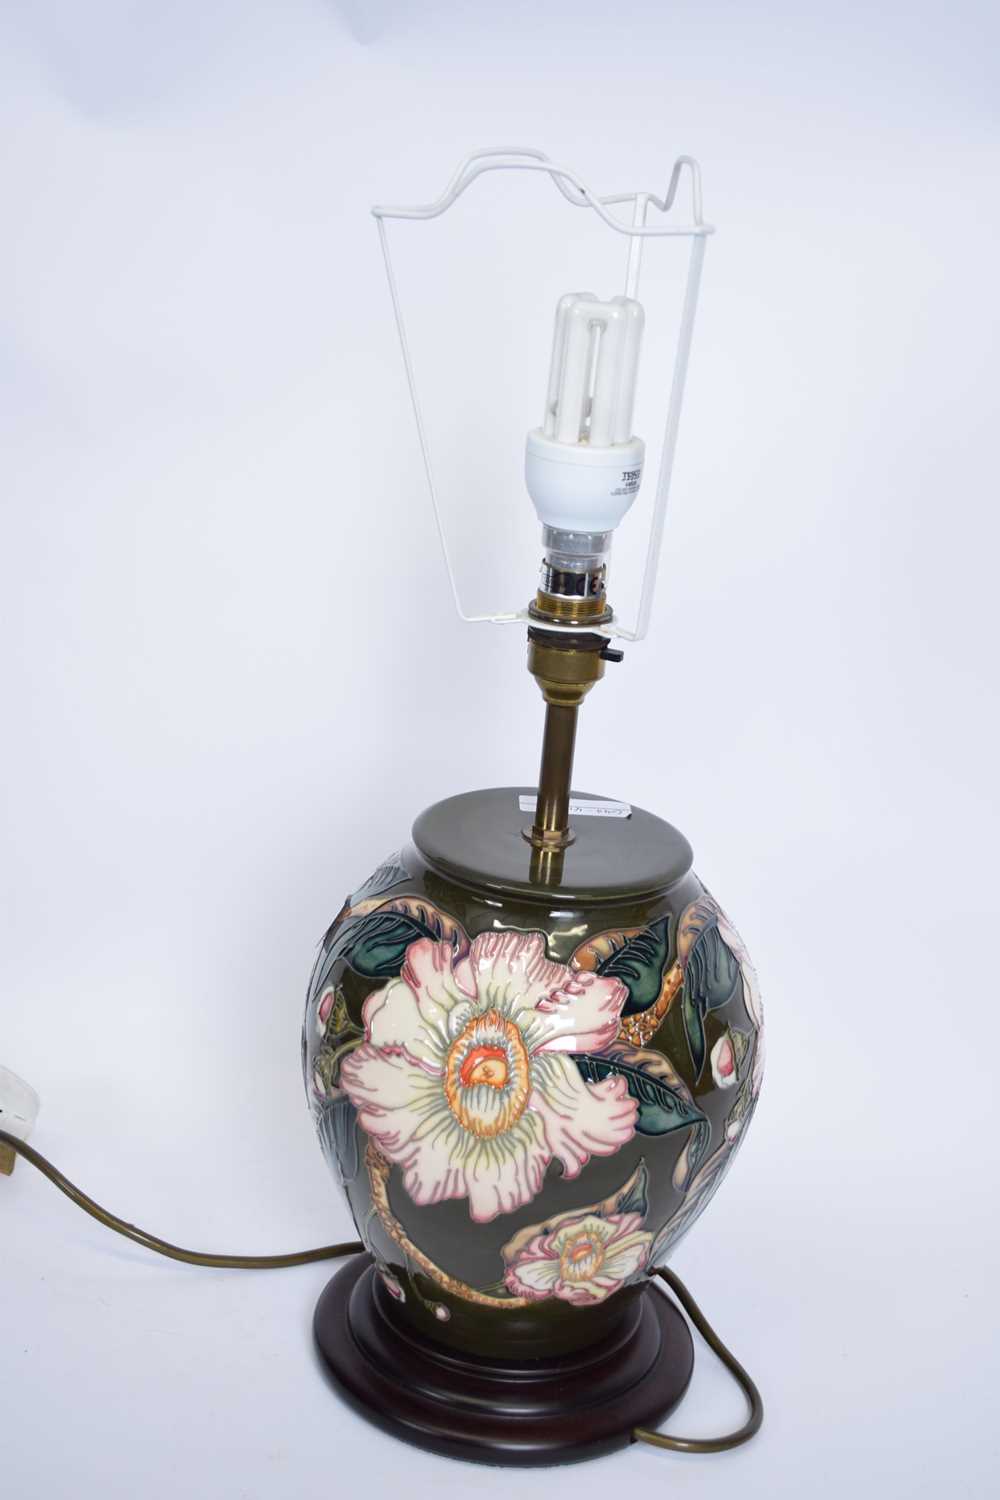 Moorcroft table lamp with tube lined floral design with beige shade